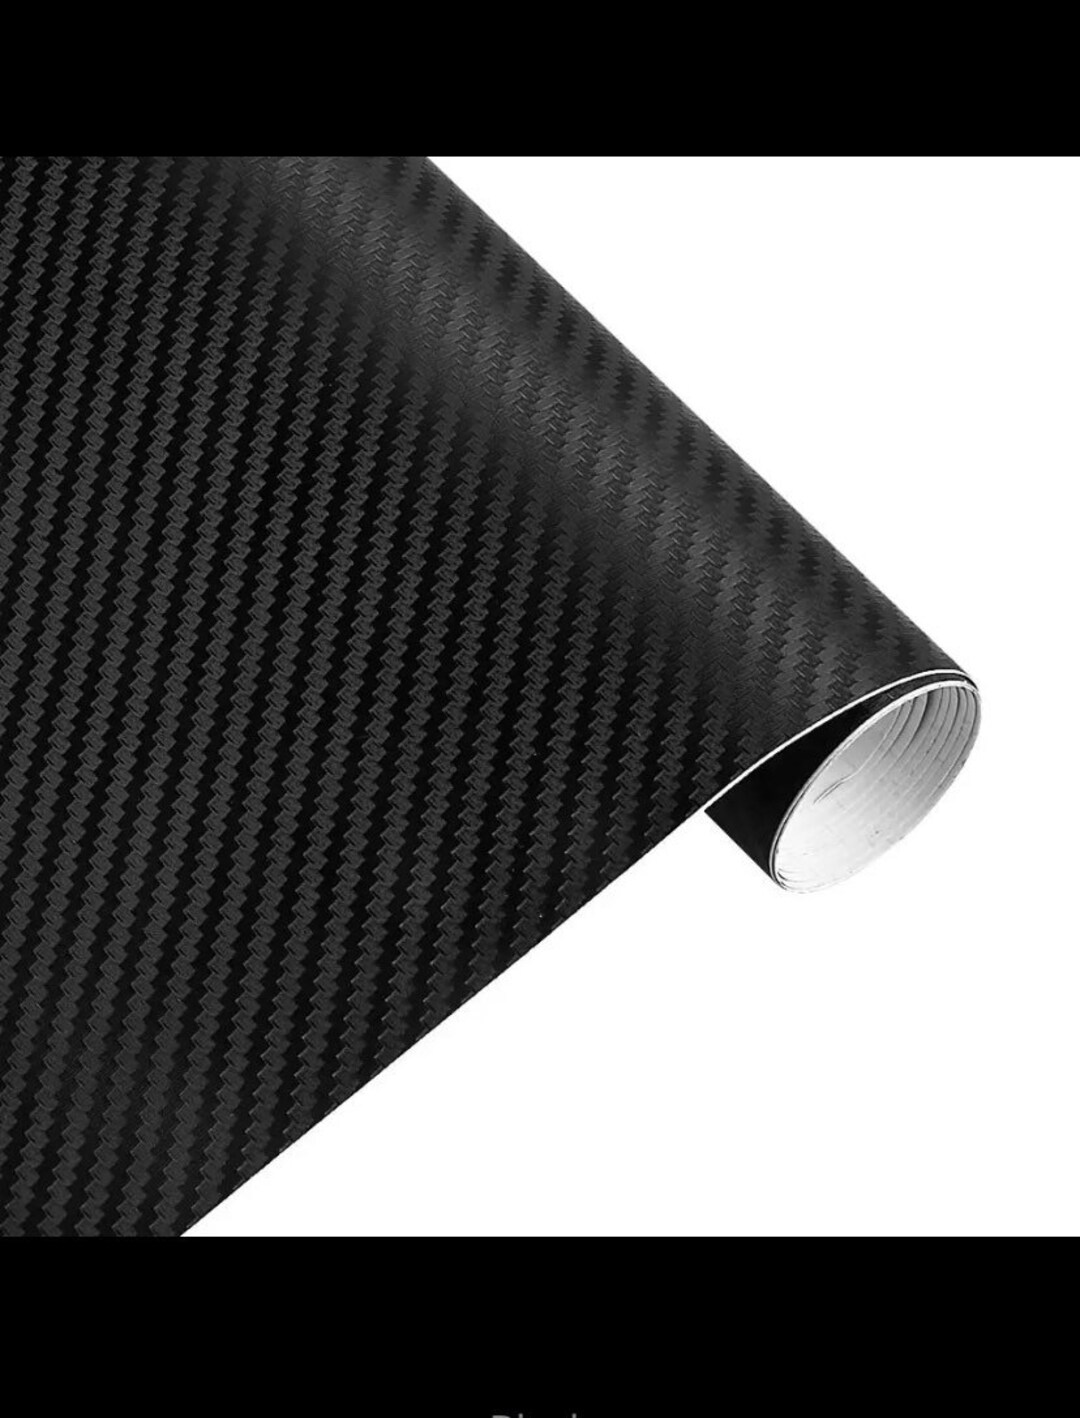 30cm 127 Cm 3D Black Carbon Fiber Vinyl Car Wrap Sheet Roll Film Car  Stickers and Decal Motorcycle Auto Styling Accessories Automobile -   Finland